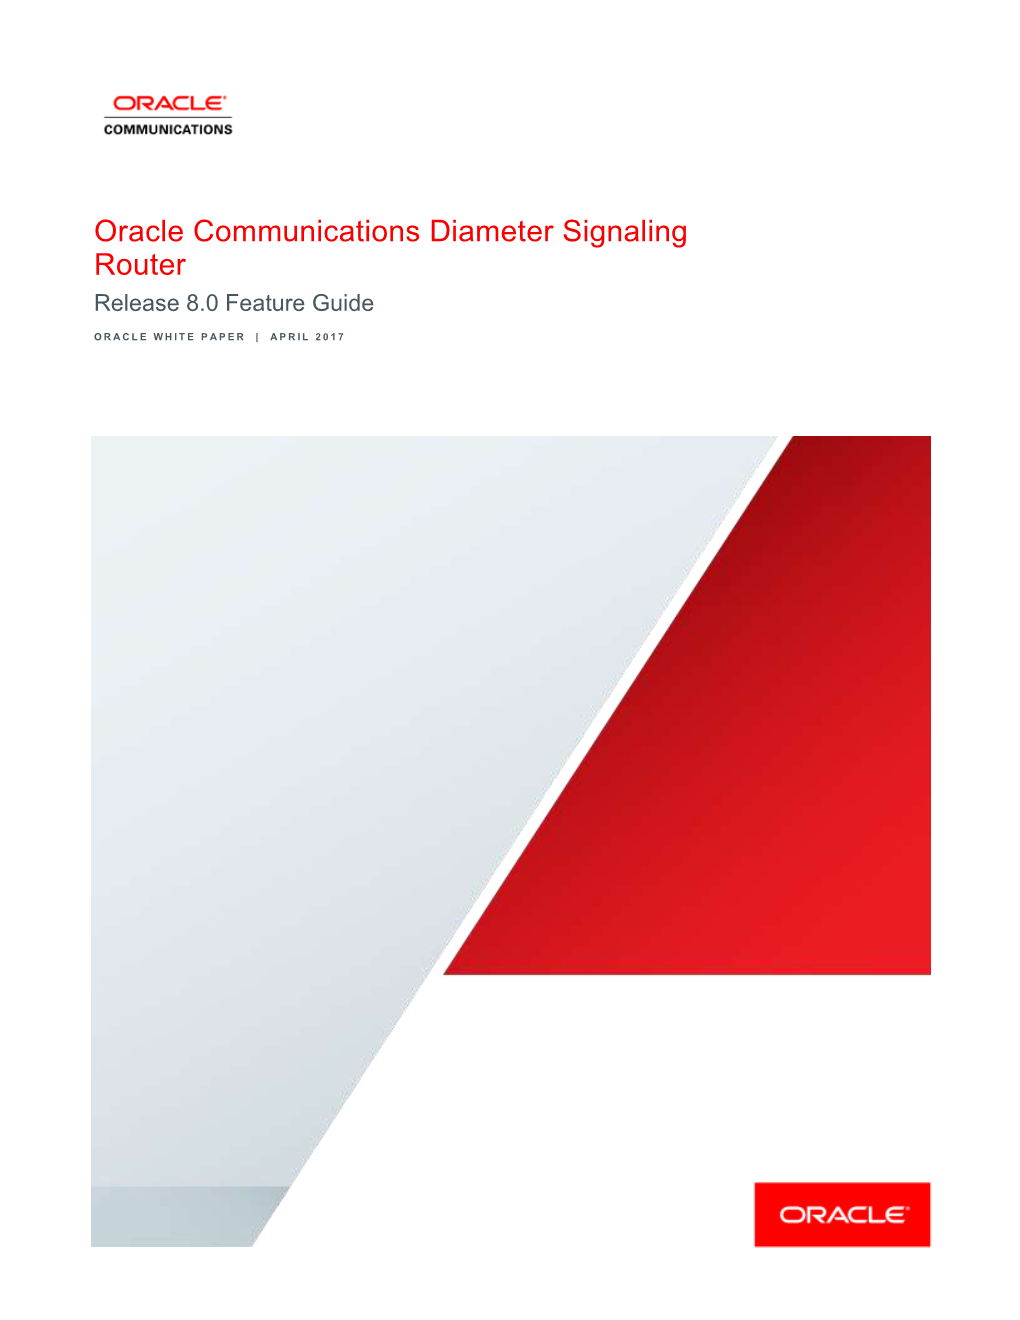 Oracle Communications Diameter Signaling Router Release 8.0 Feature Guide